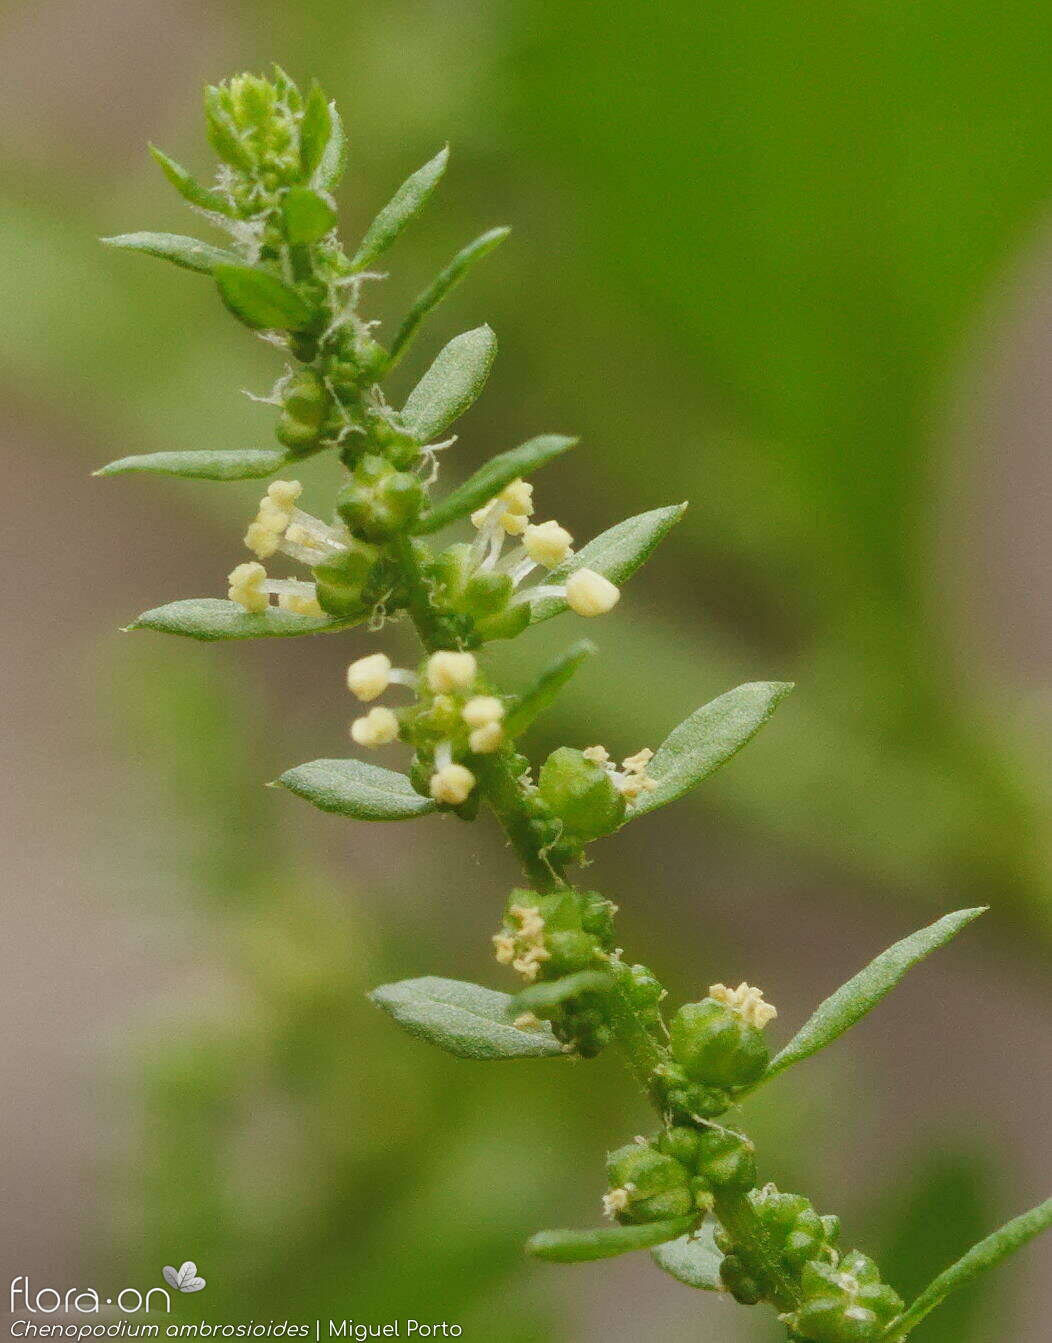 Chenopodium ambrosioides - Flor (close-up) | Miguel Porto; CC BY-NC 4.0